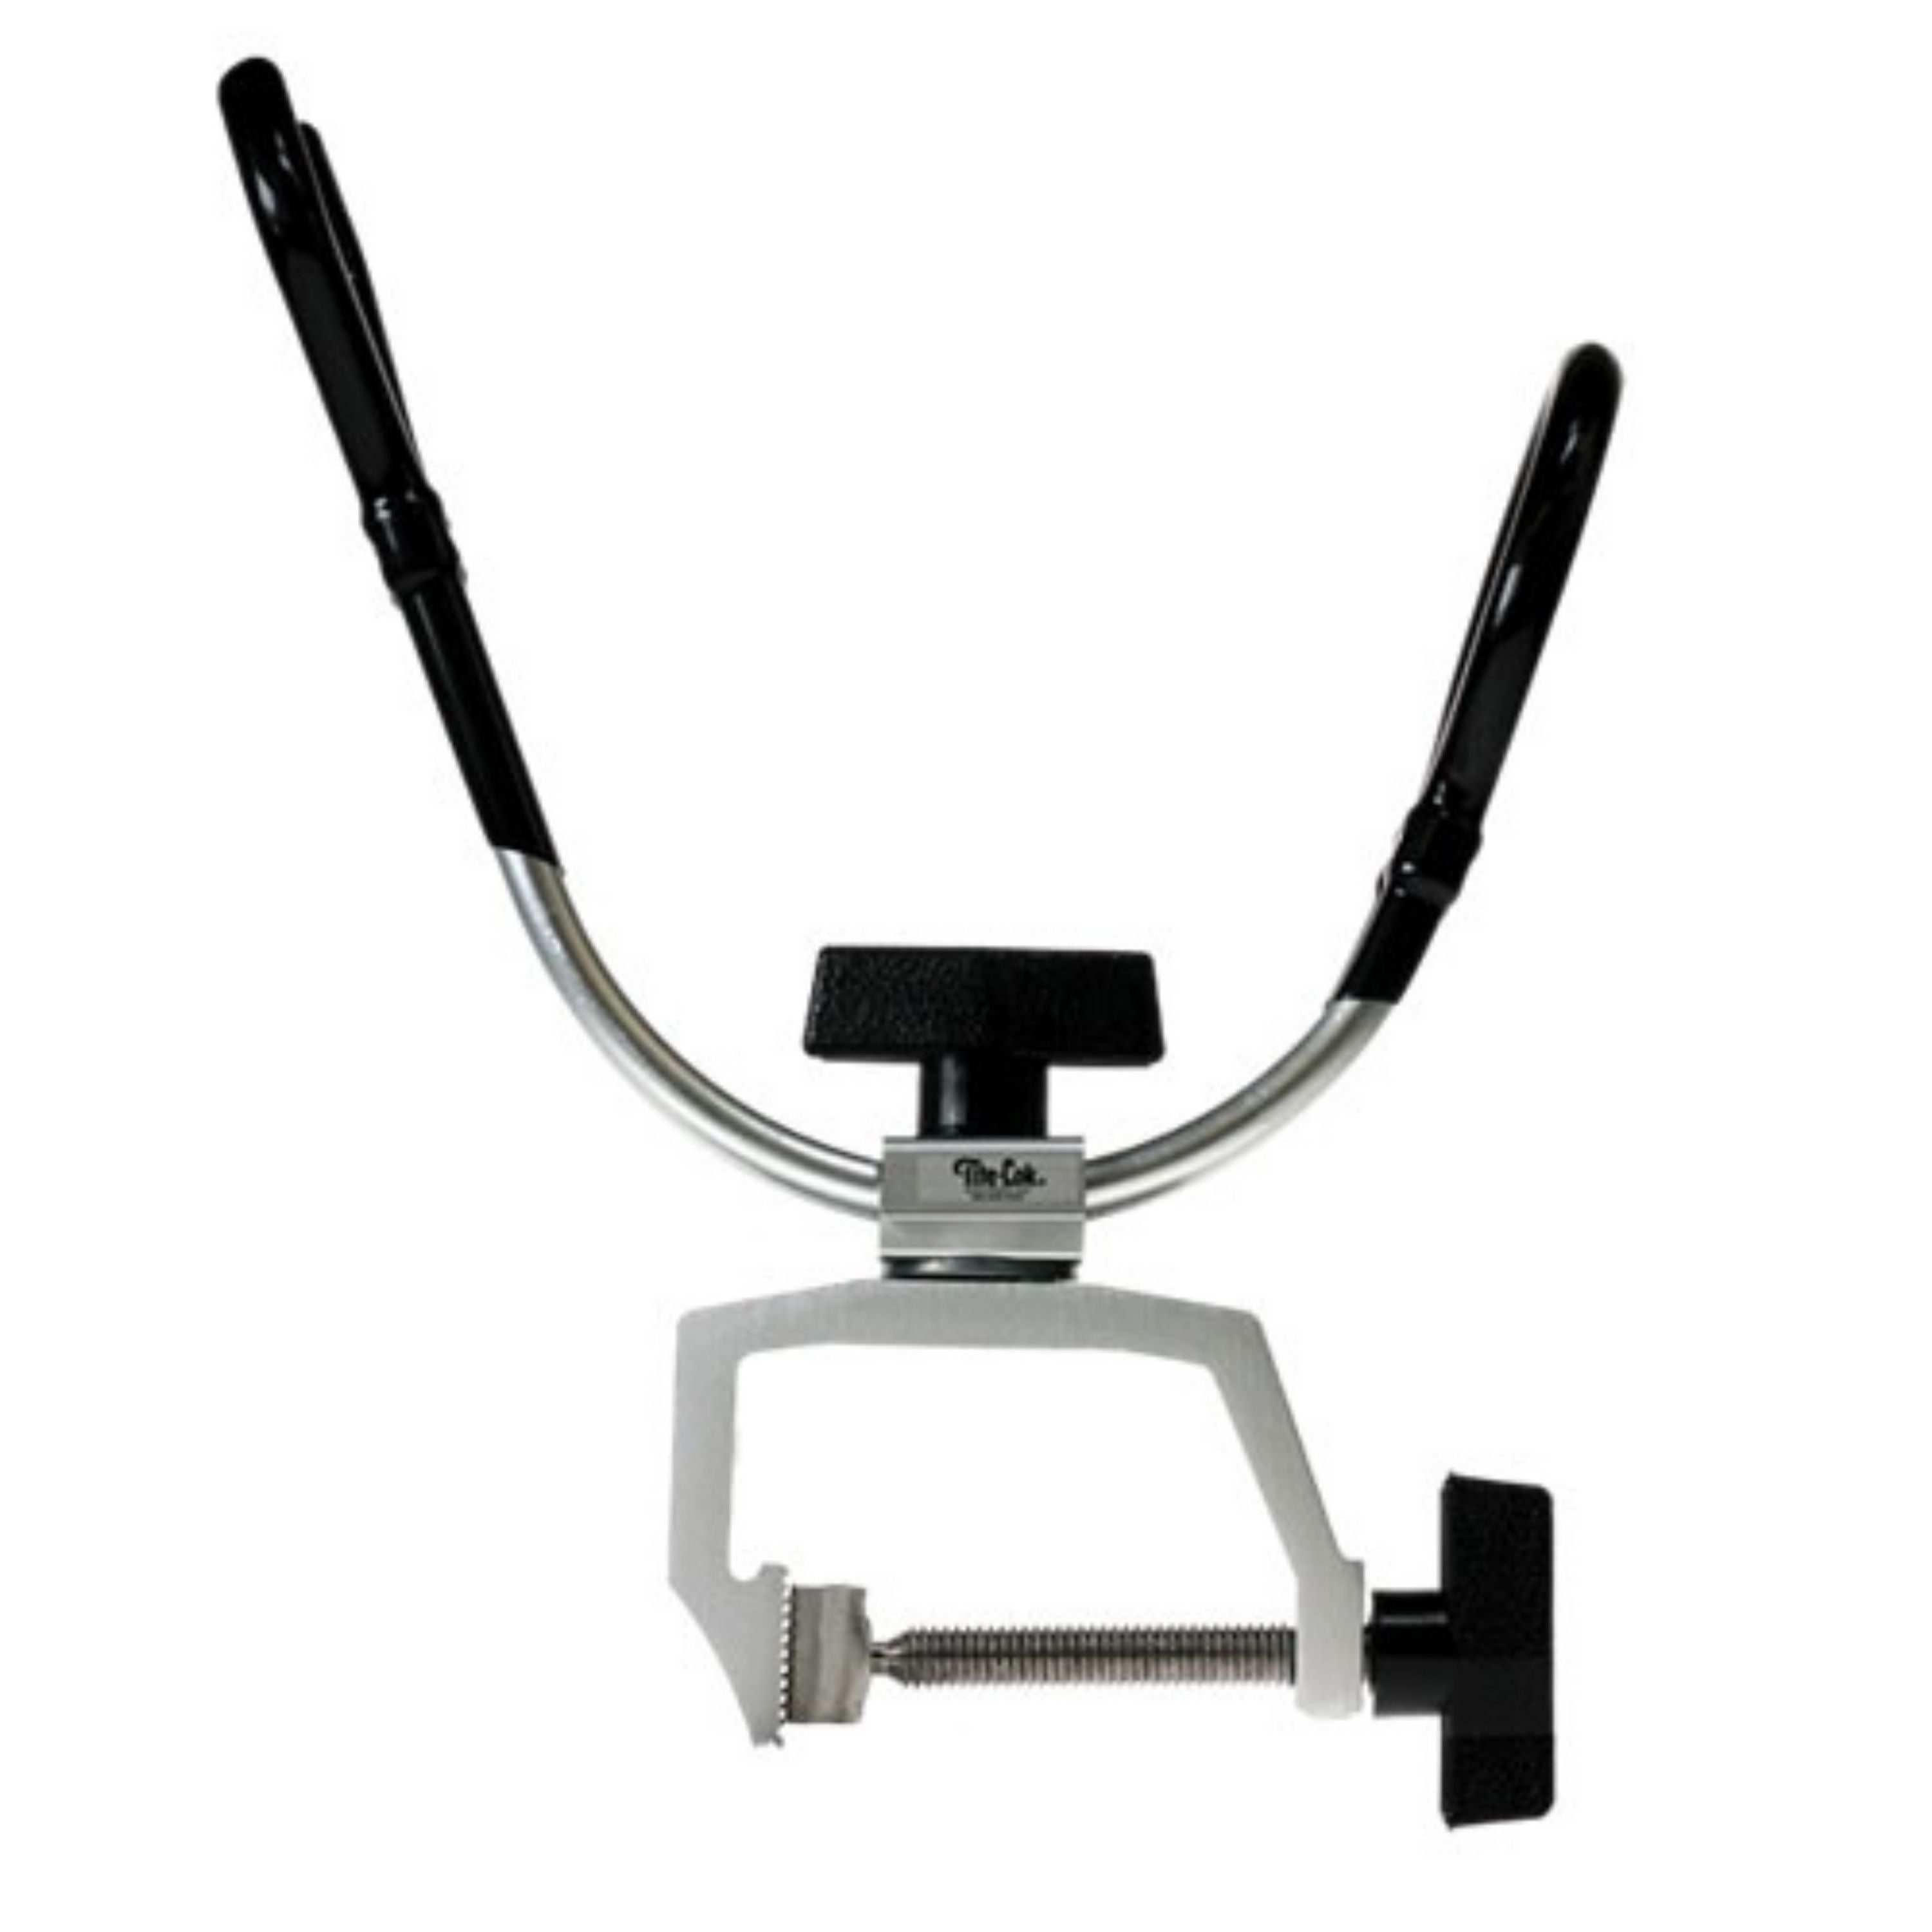 Rod holder with C-clamp mount